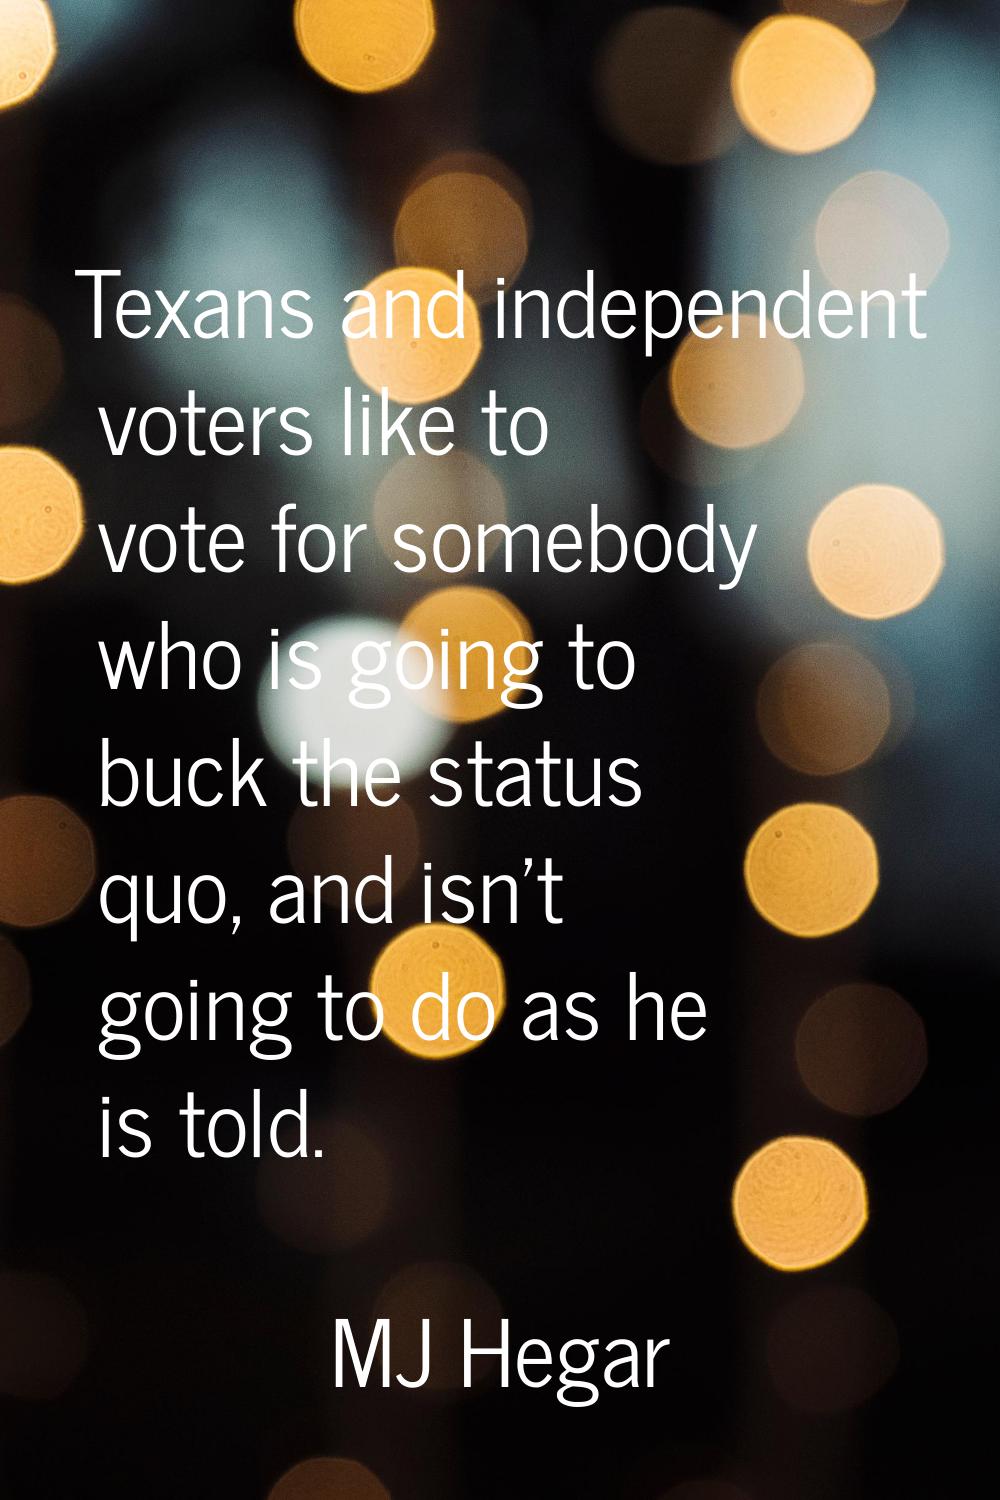 Texans and independent voters like to vote for somebody who is going to buck the status quo, and is